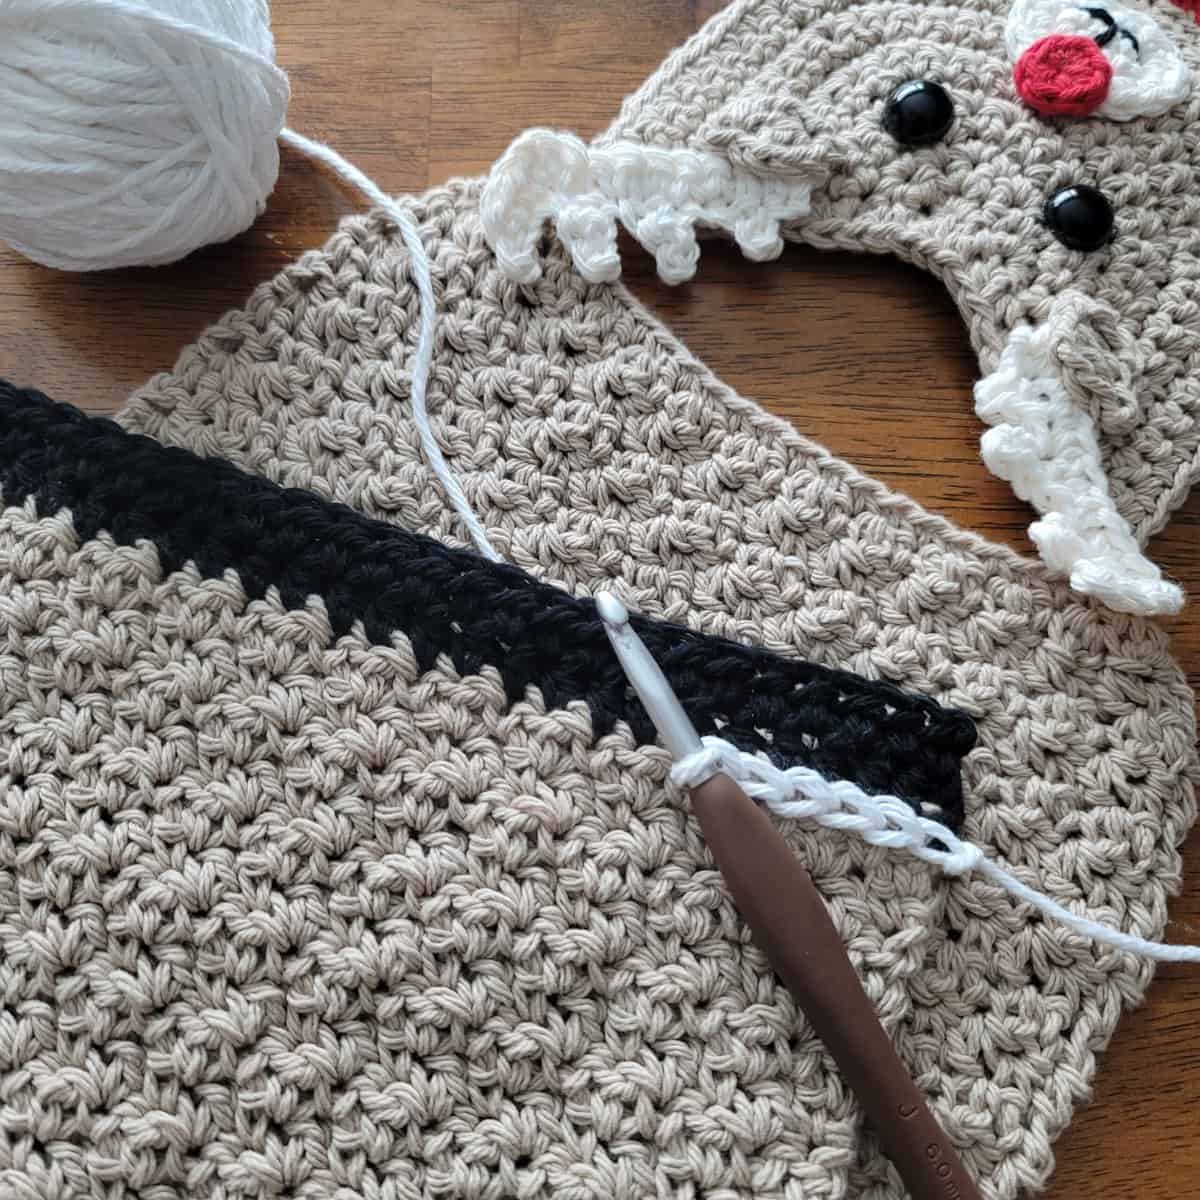 Outlining crochet reindeer hooves with white surface crochet stitches.